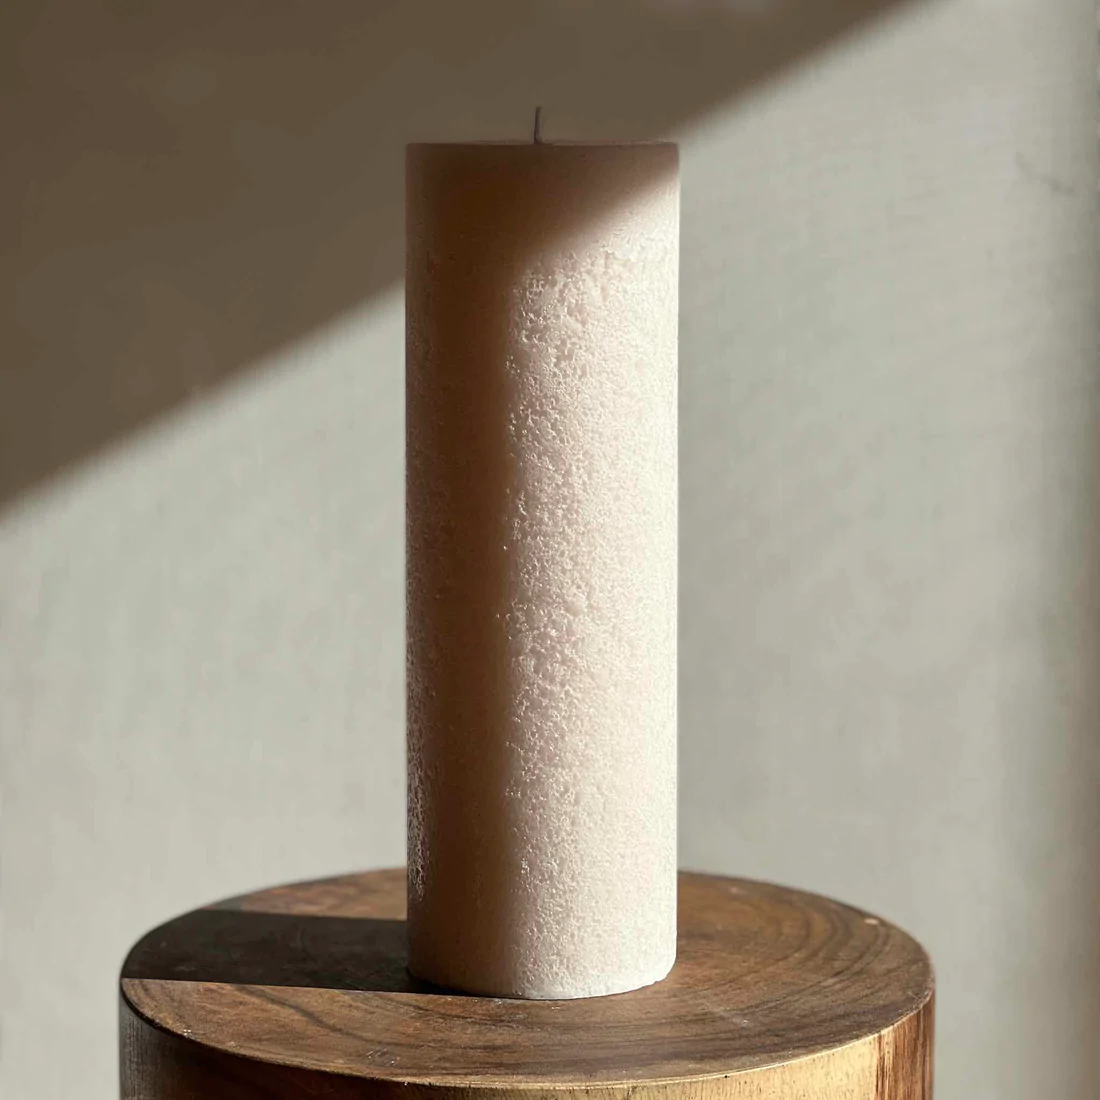 Candle Kiosk - Textured Sandstone Pillar Candles - large candle on wood stool - Stocked at LOVINLIFE Co Byron Bay for all your gifts, candles and interior decorating needs